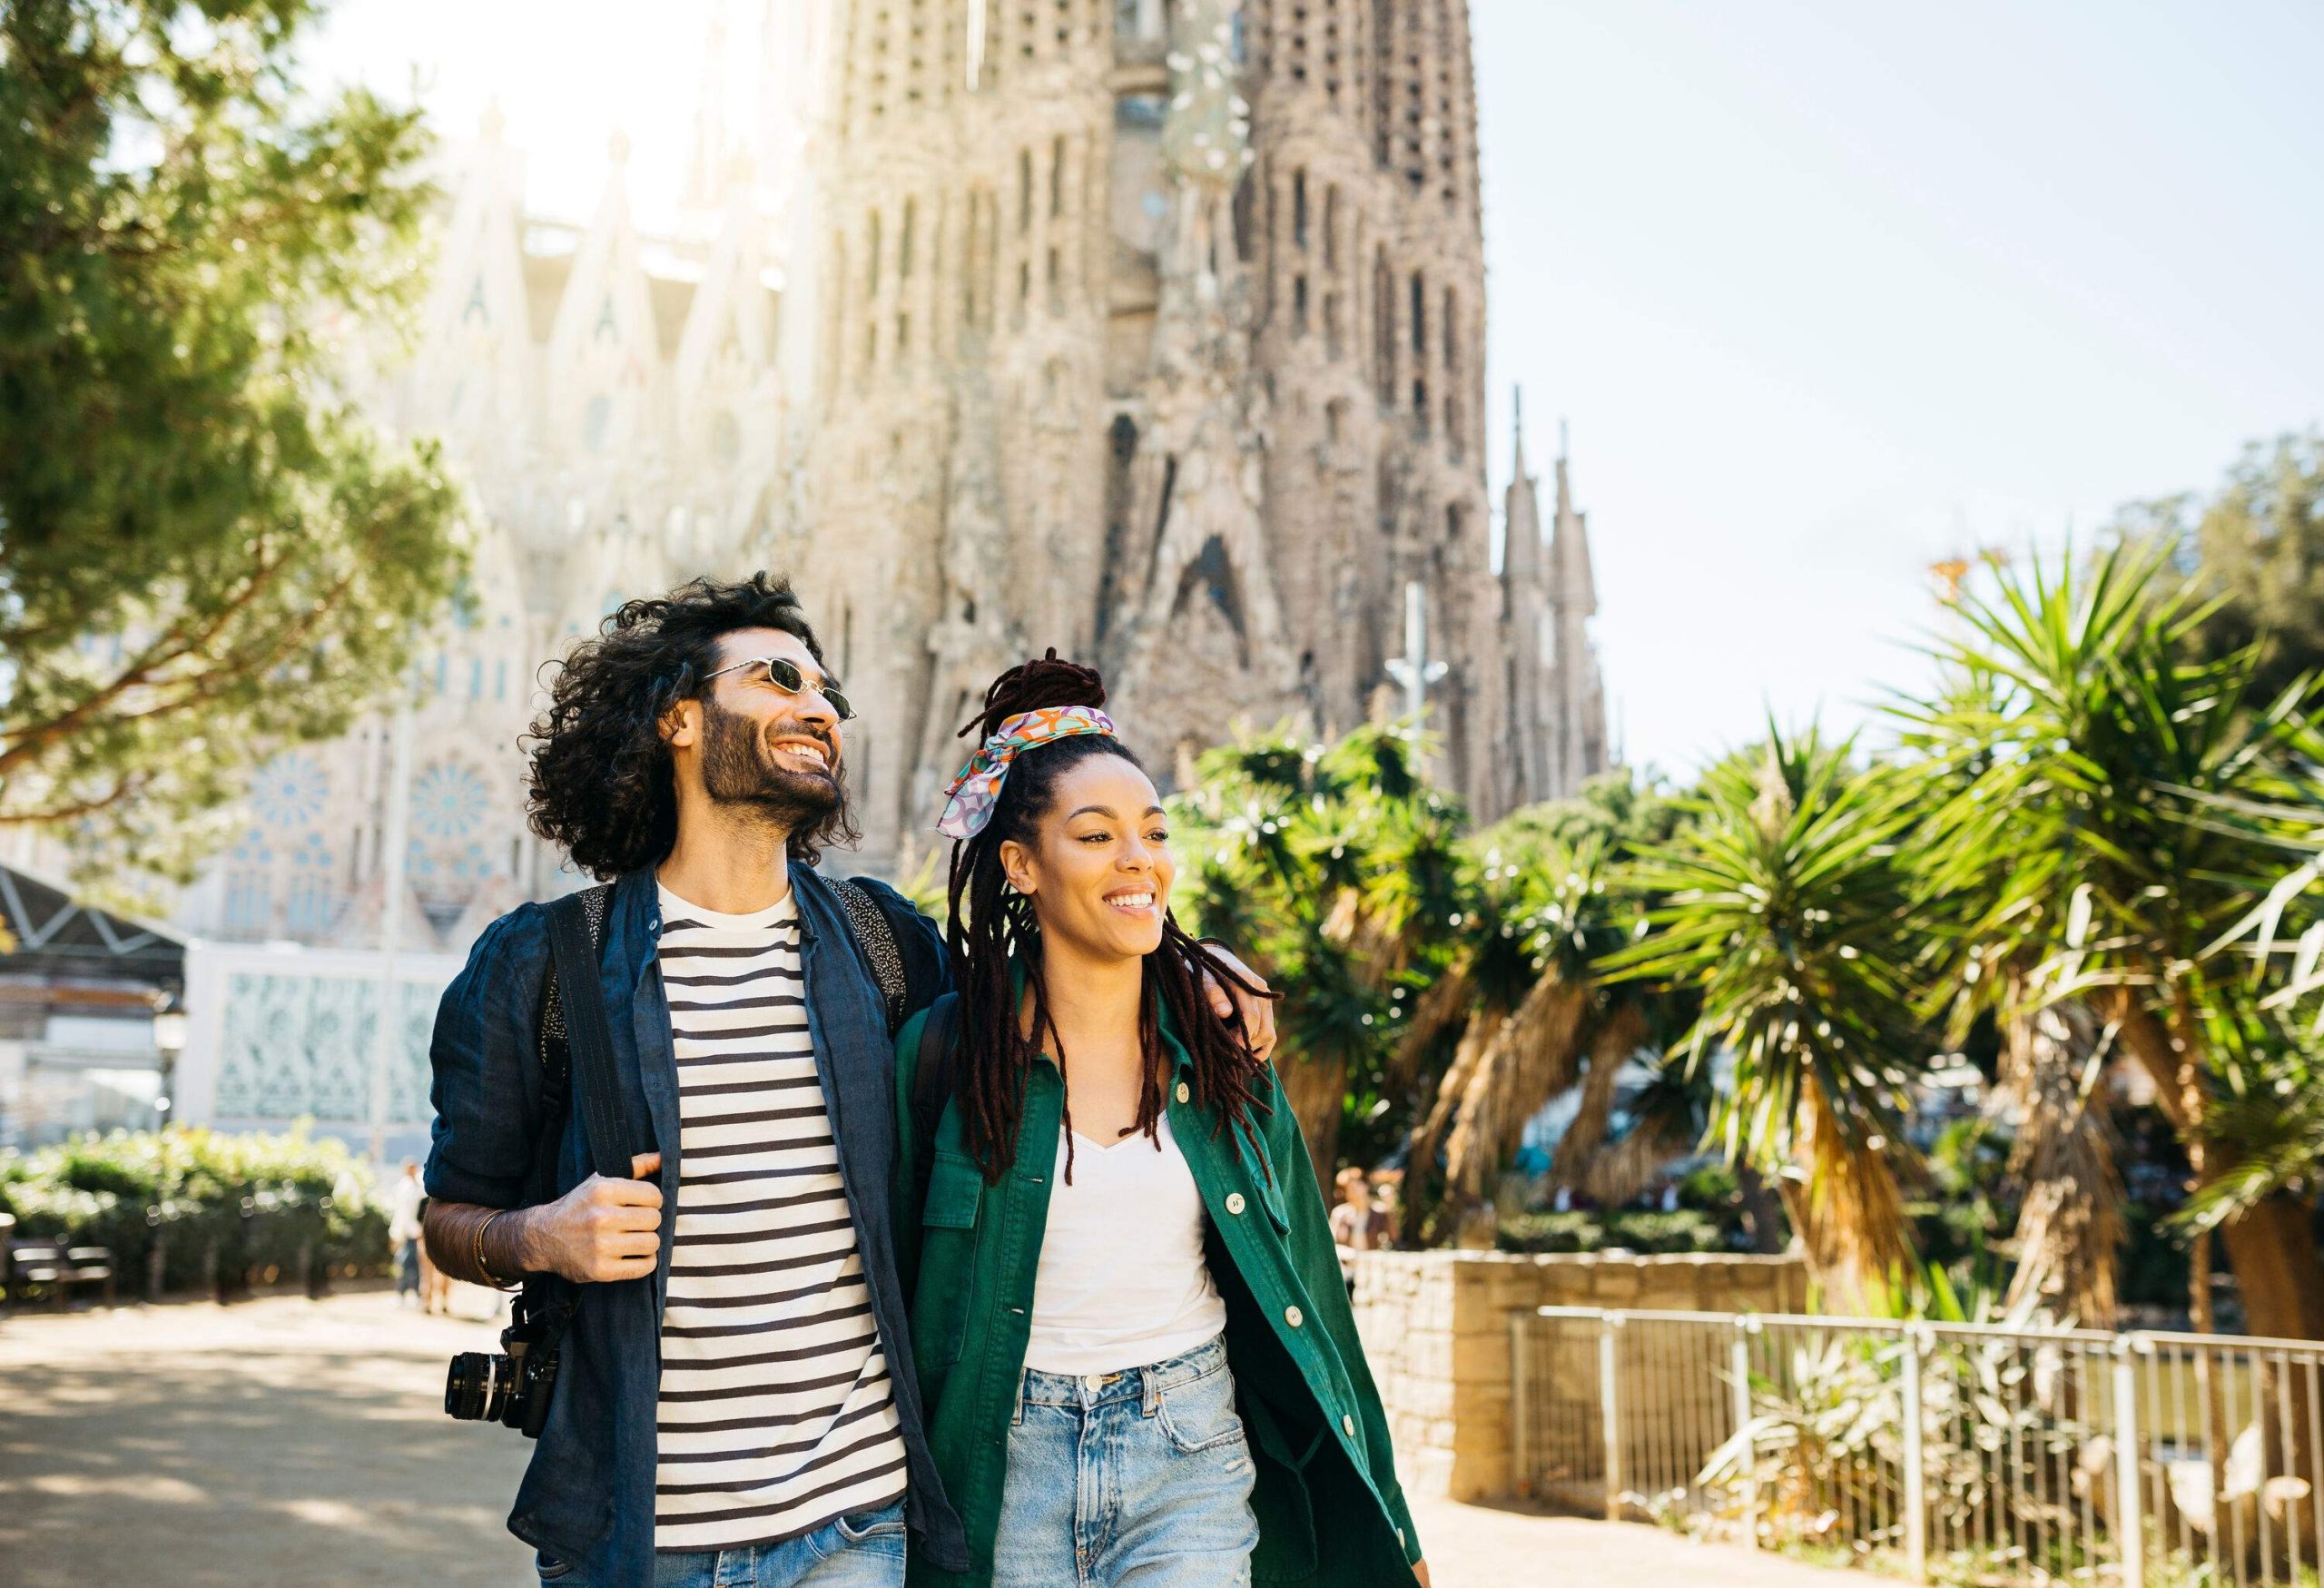 A stylish couple walking down the street with the Sagrada Familia behind them.